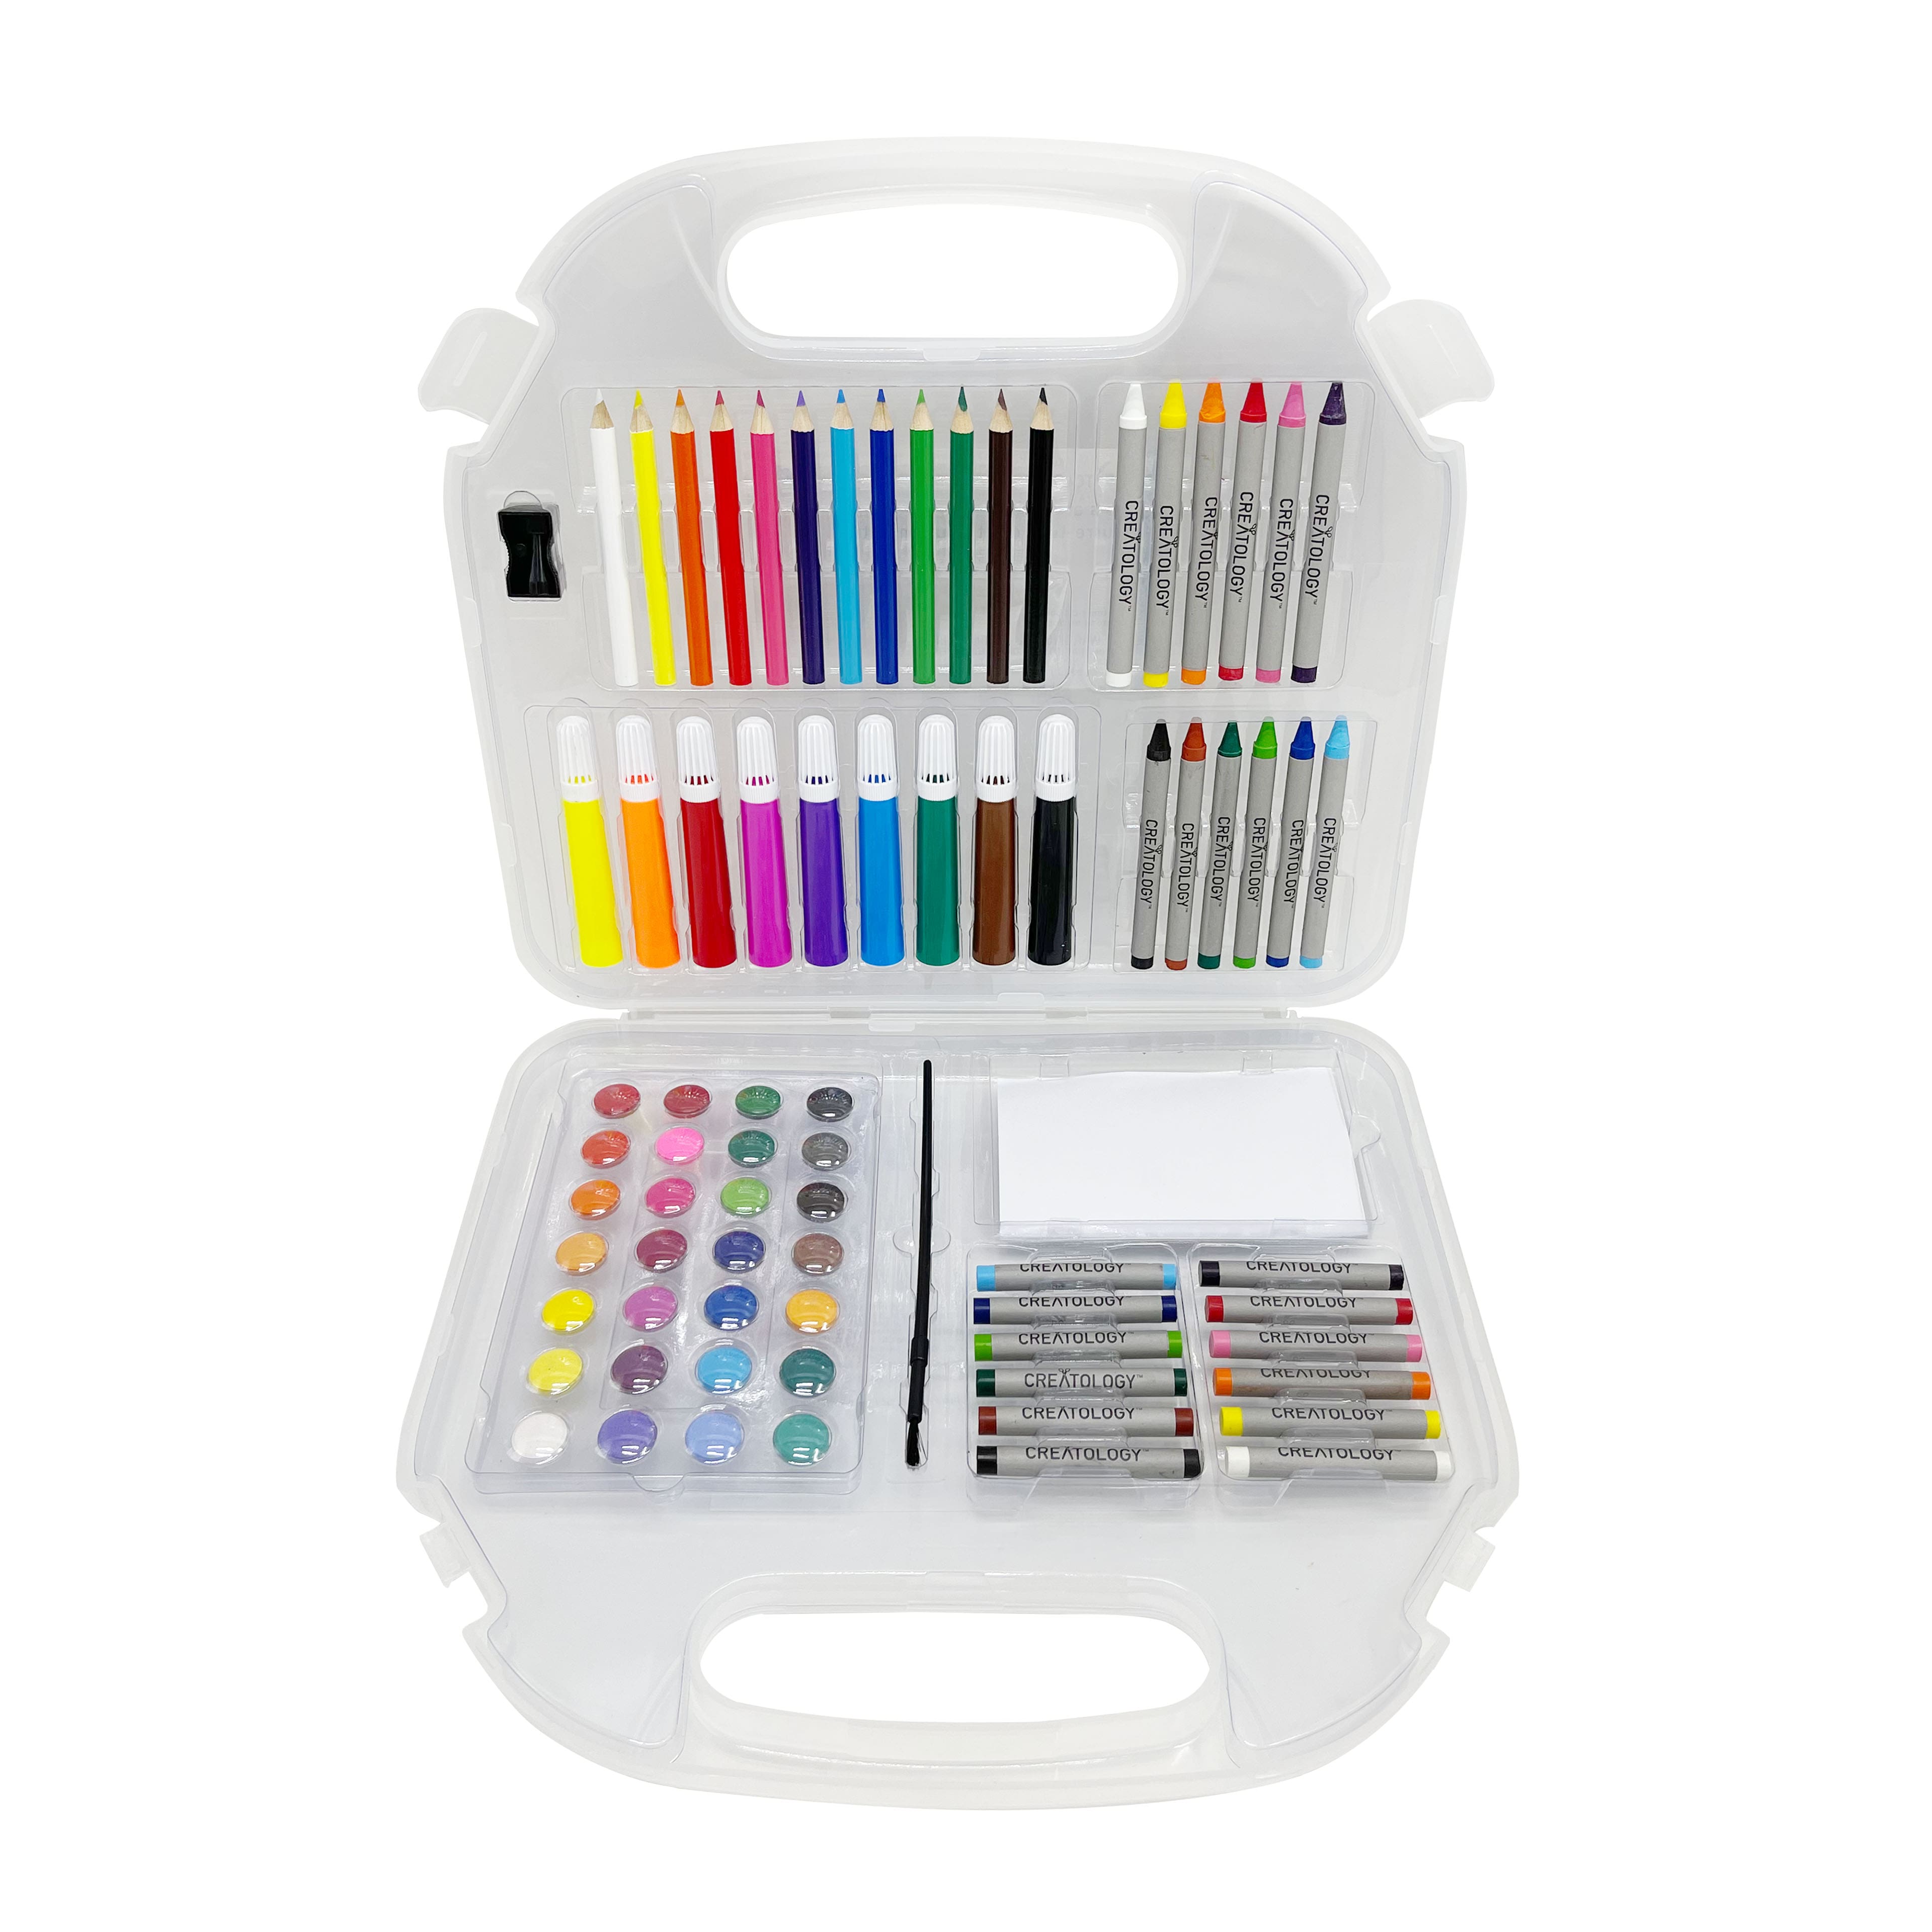 12 Pack: Kid&#x27;s Art Tote Set by Creatology&#x2122;